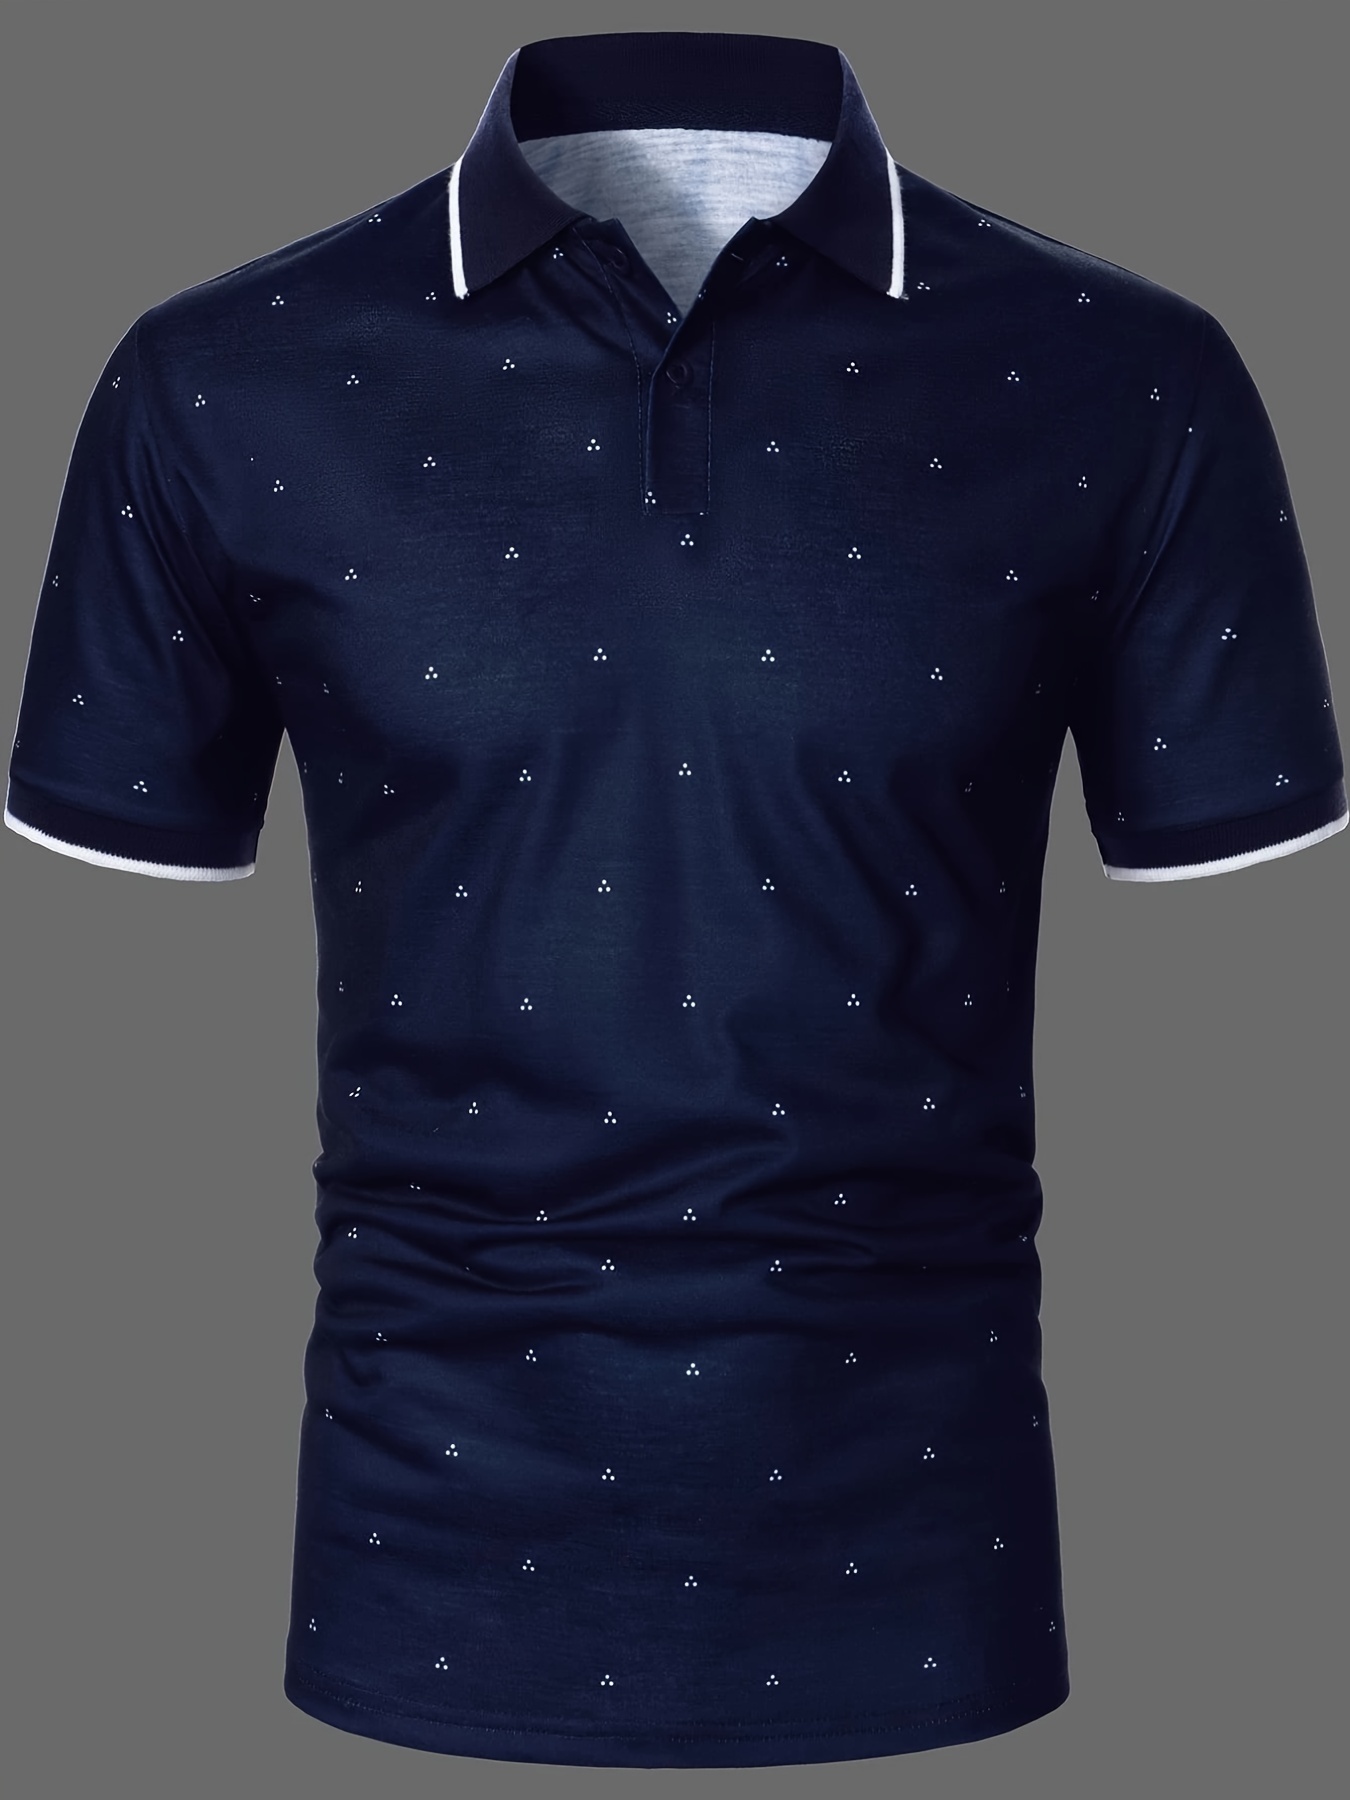 Ambiance Apparel Navy Blue Shirt Size L - $10 (60% Off Retail